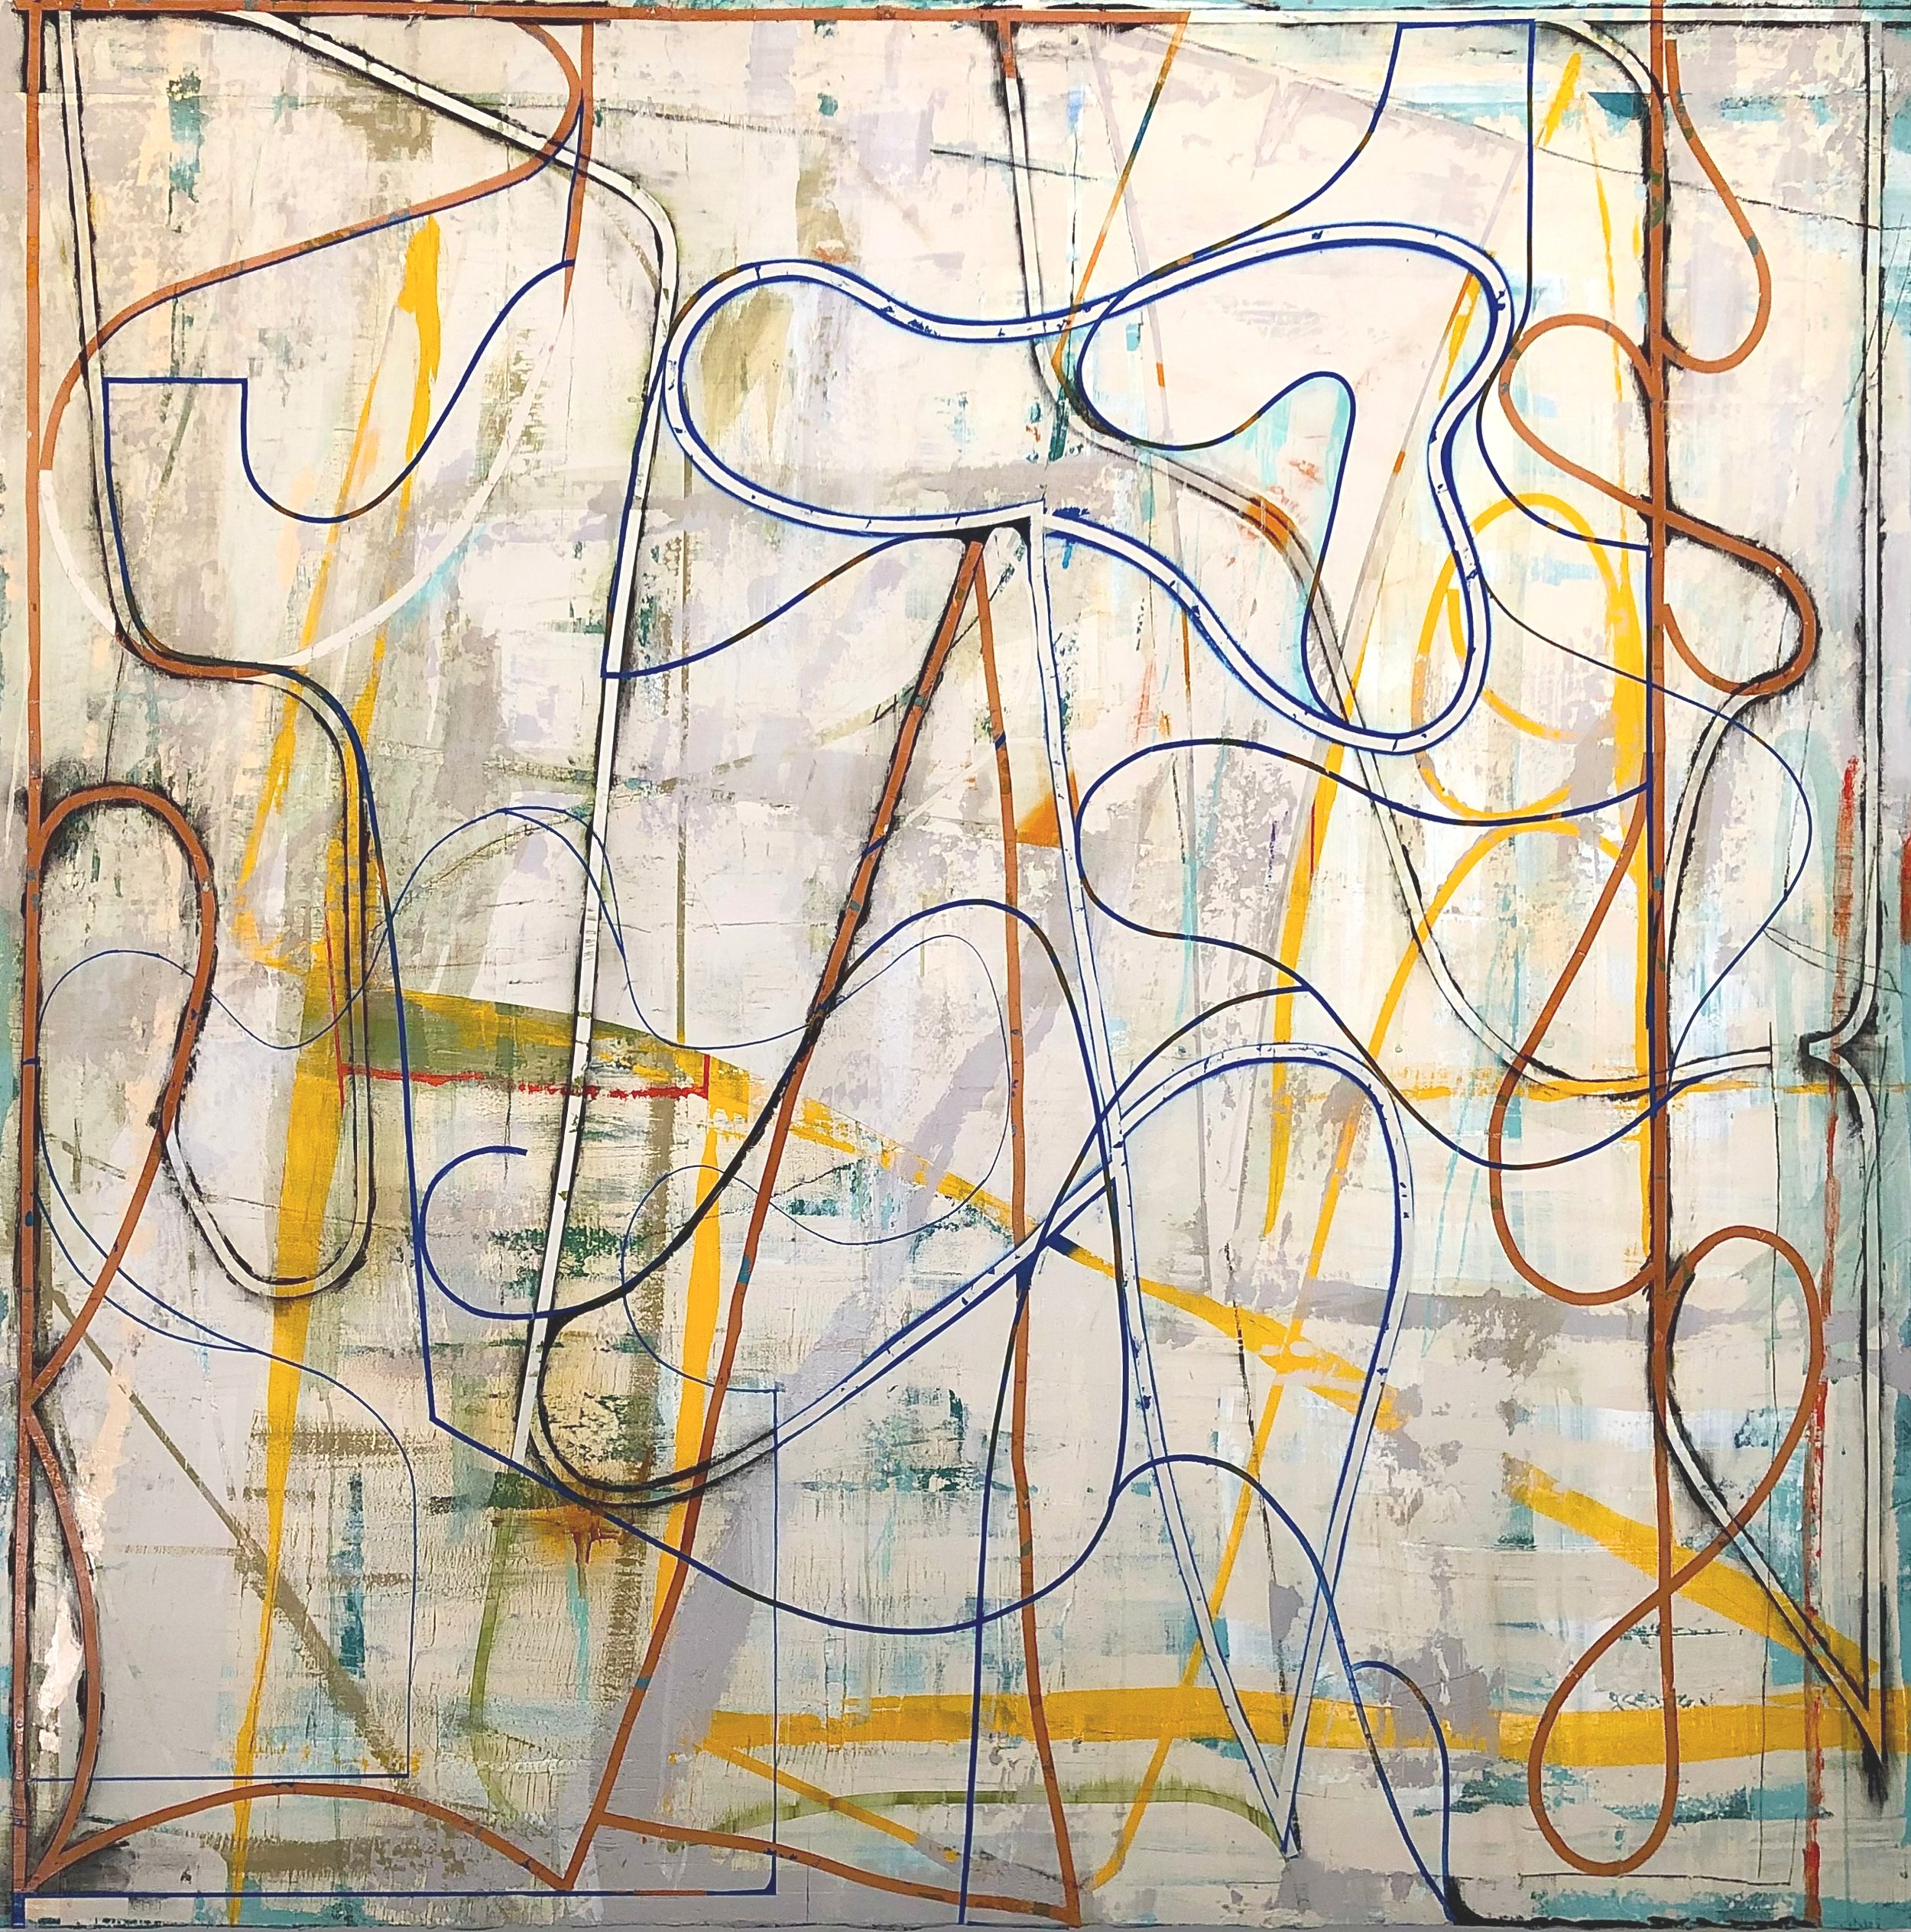    The Drought Reveals a City    Plaster, Acrylic, Spray paint, and Charcoal on Panel  60” x 60”, 2020.   